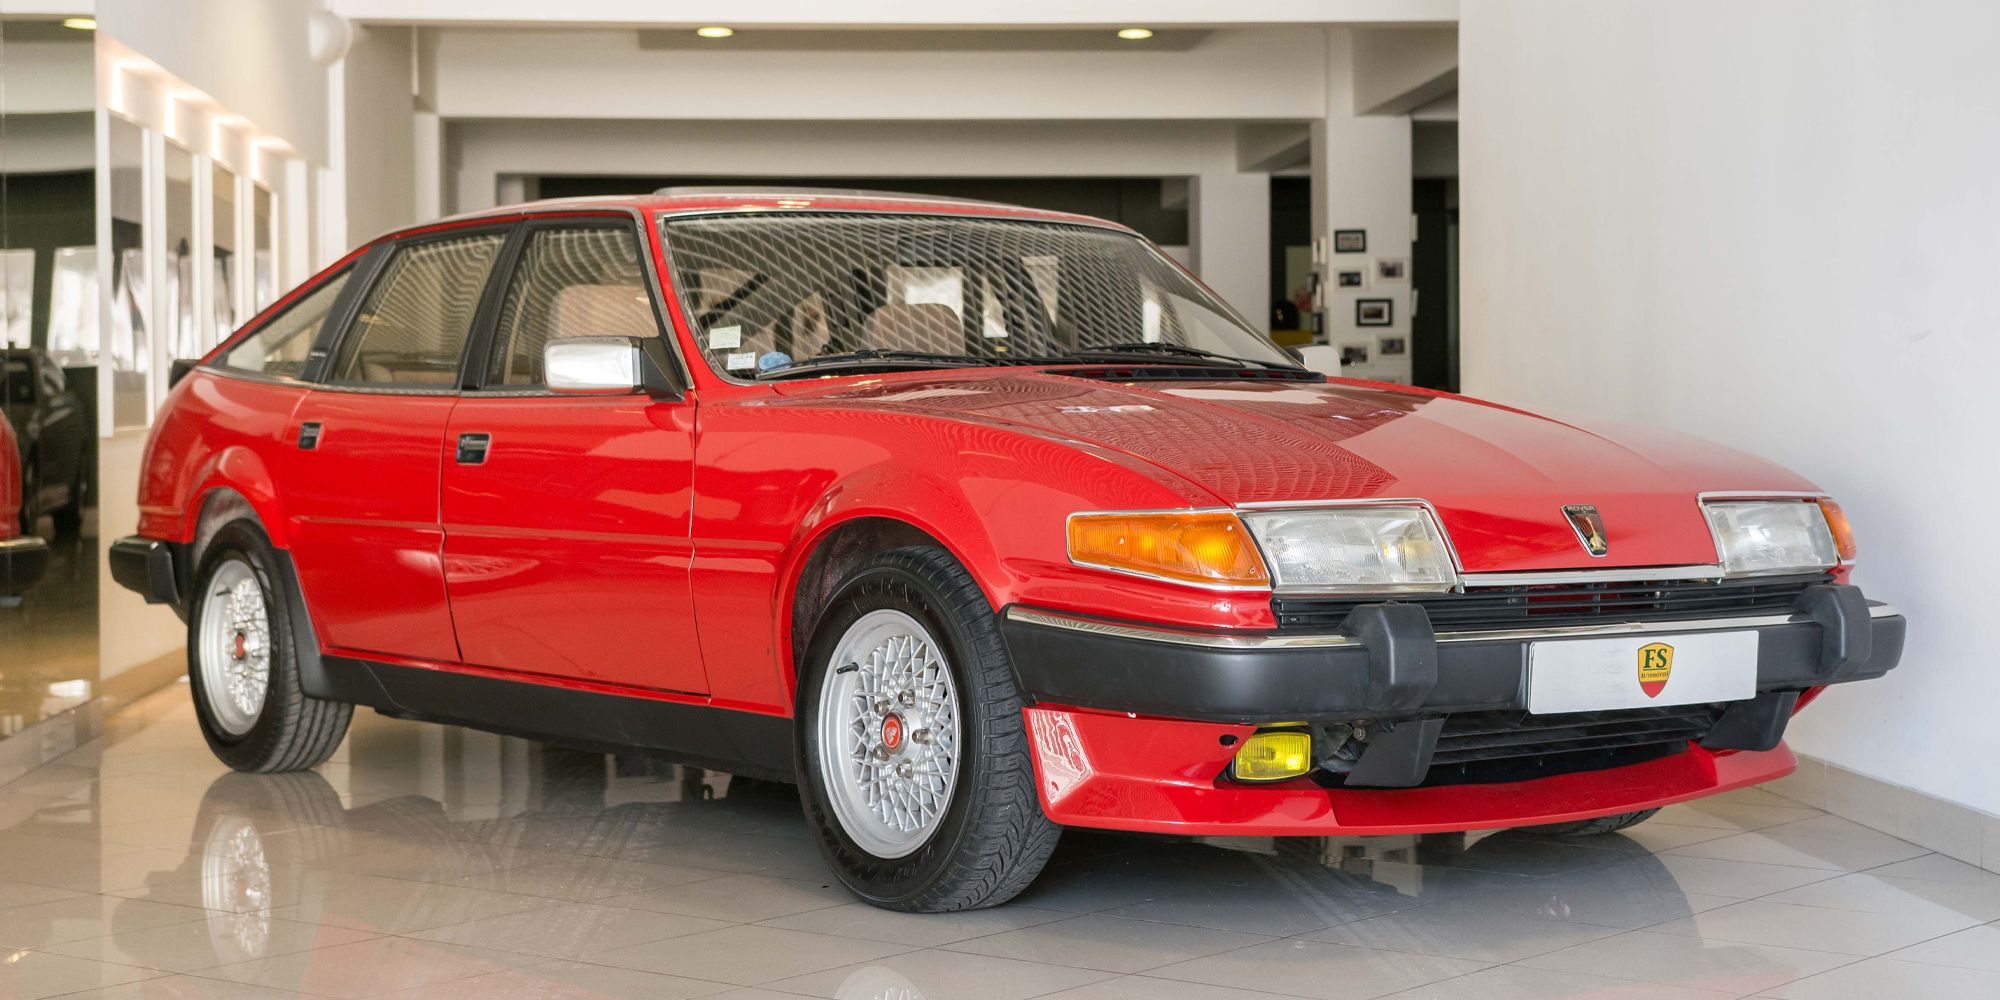 The front of a red SD1